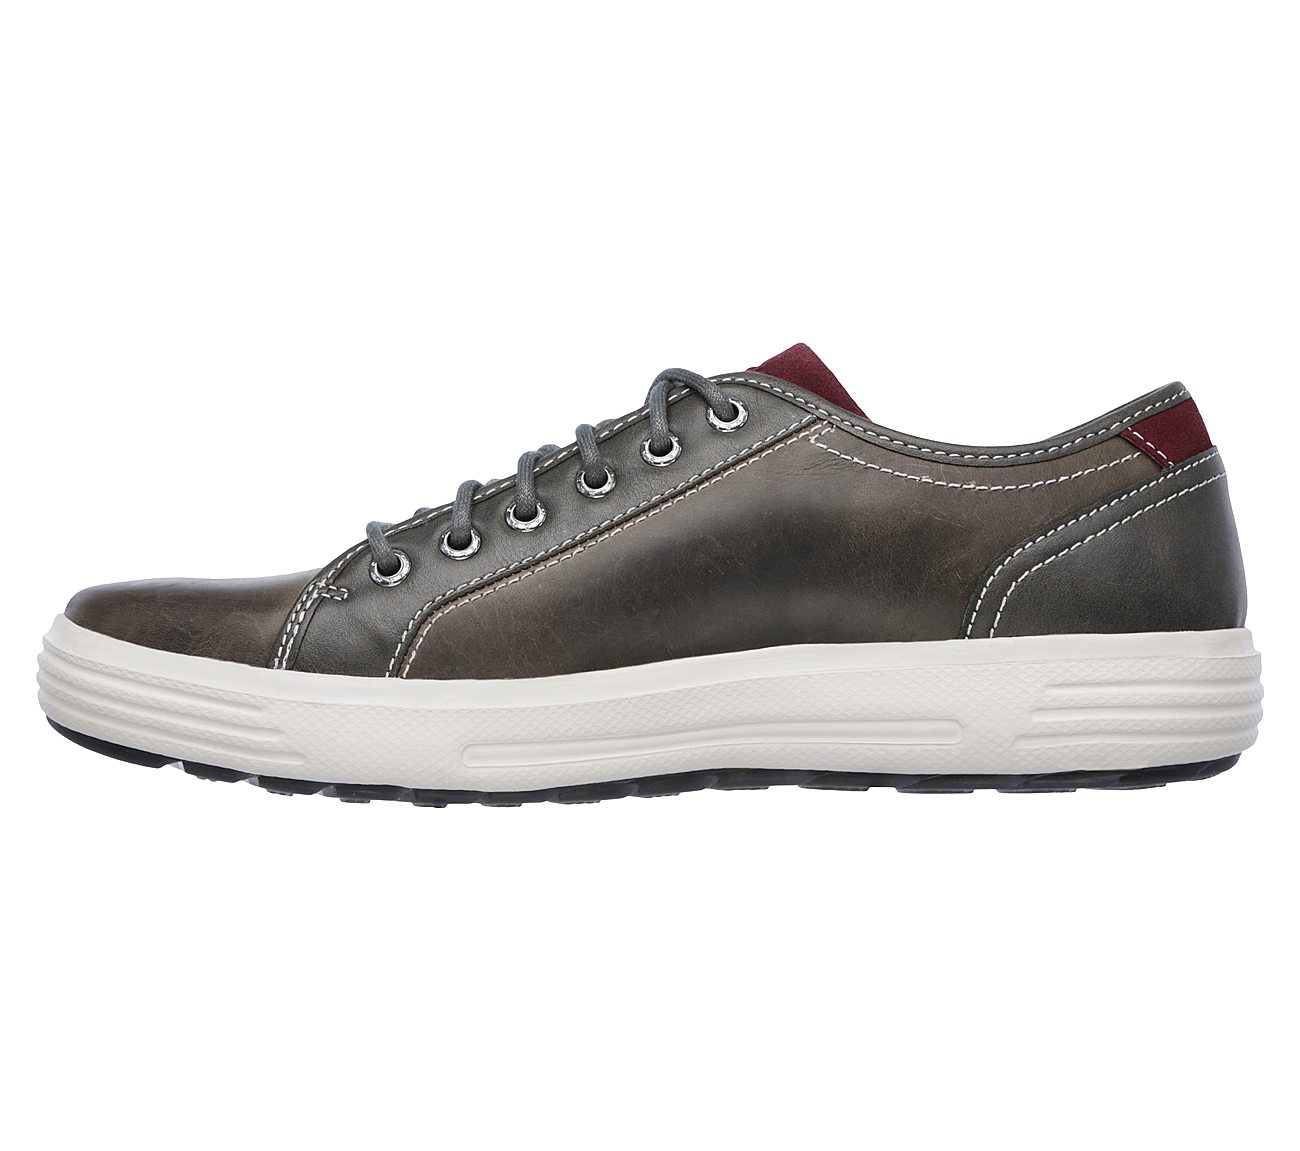 Buy SKECHERS Relaxed Fit: Porter - Ressen USA Casuals Shoes